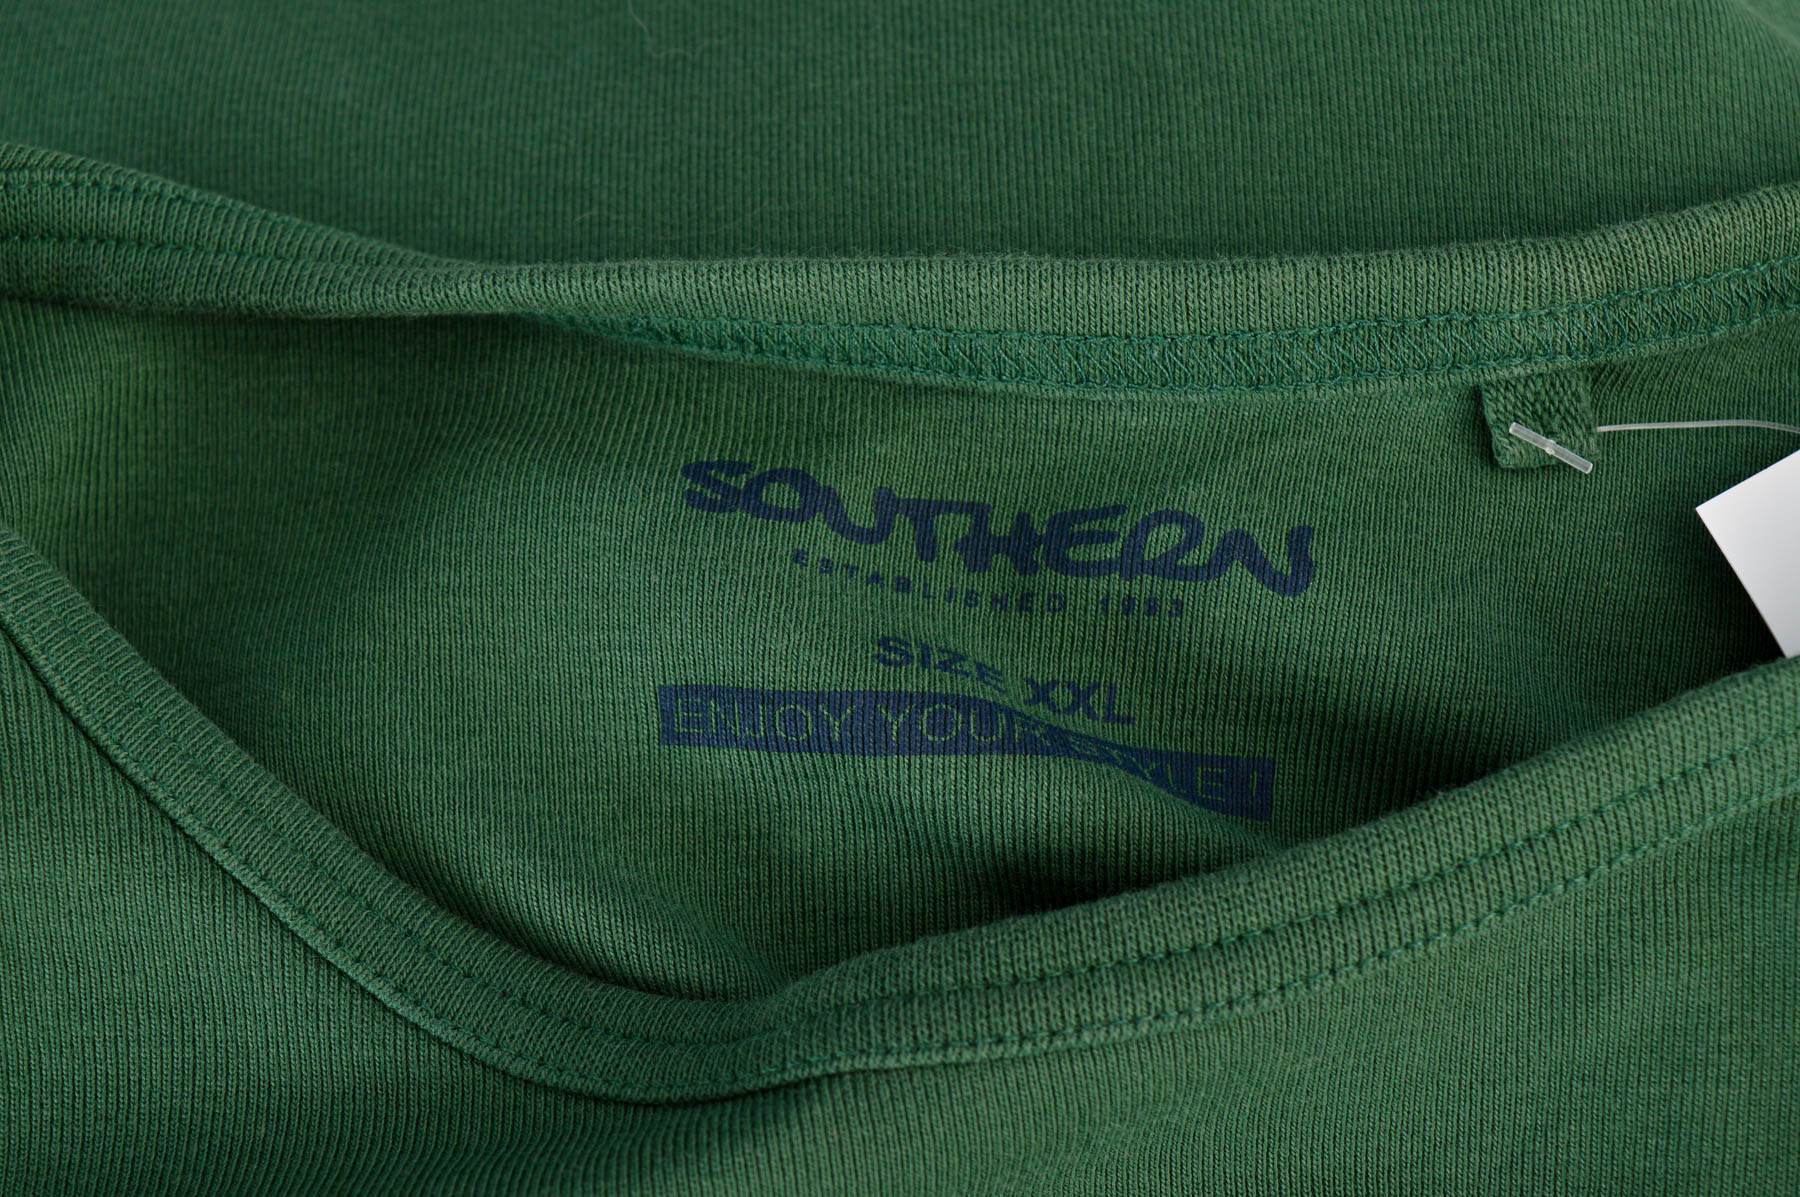 Men's sweater - Southern - 2